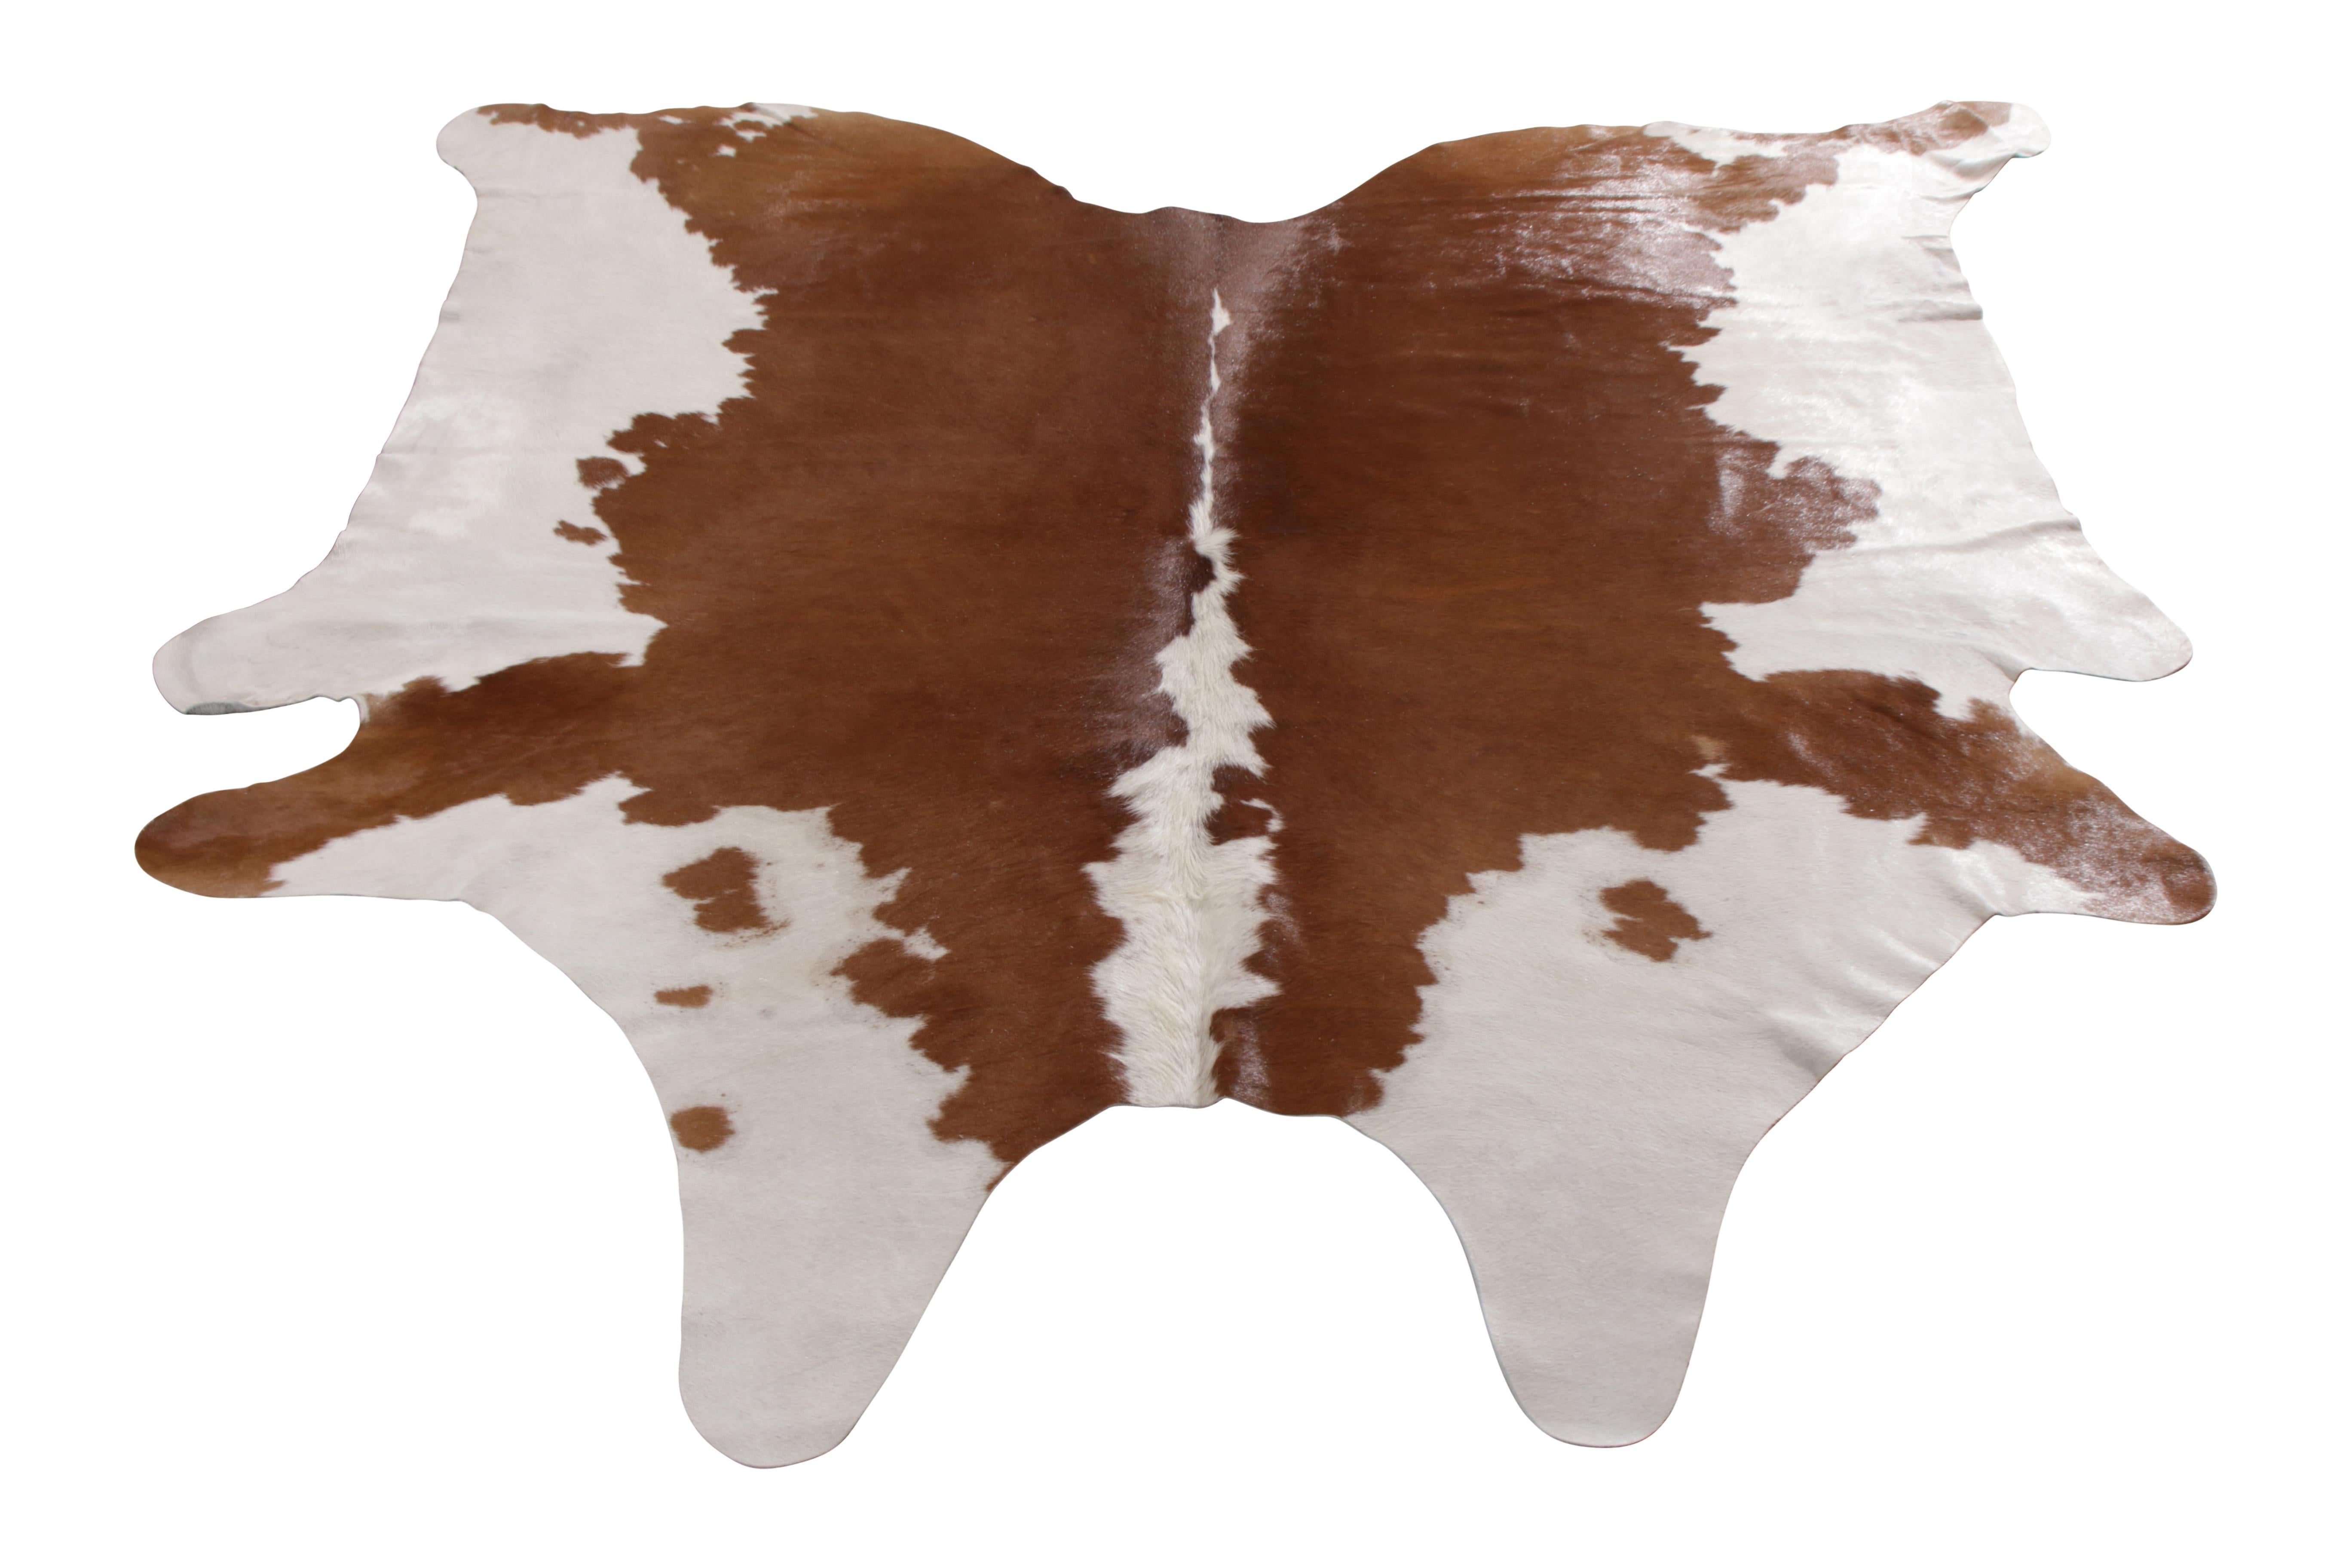 A 7 x 8 from Rug & Kilim’s line of handmade cowhide rugs. Enjoying a silky, lustrous sheen complementing the pallet of brown and white. A comfortable, textural choice, particularly well suited to country homes and rustic interiors.